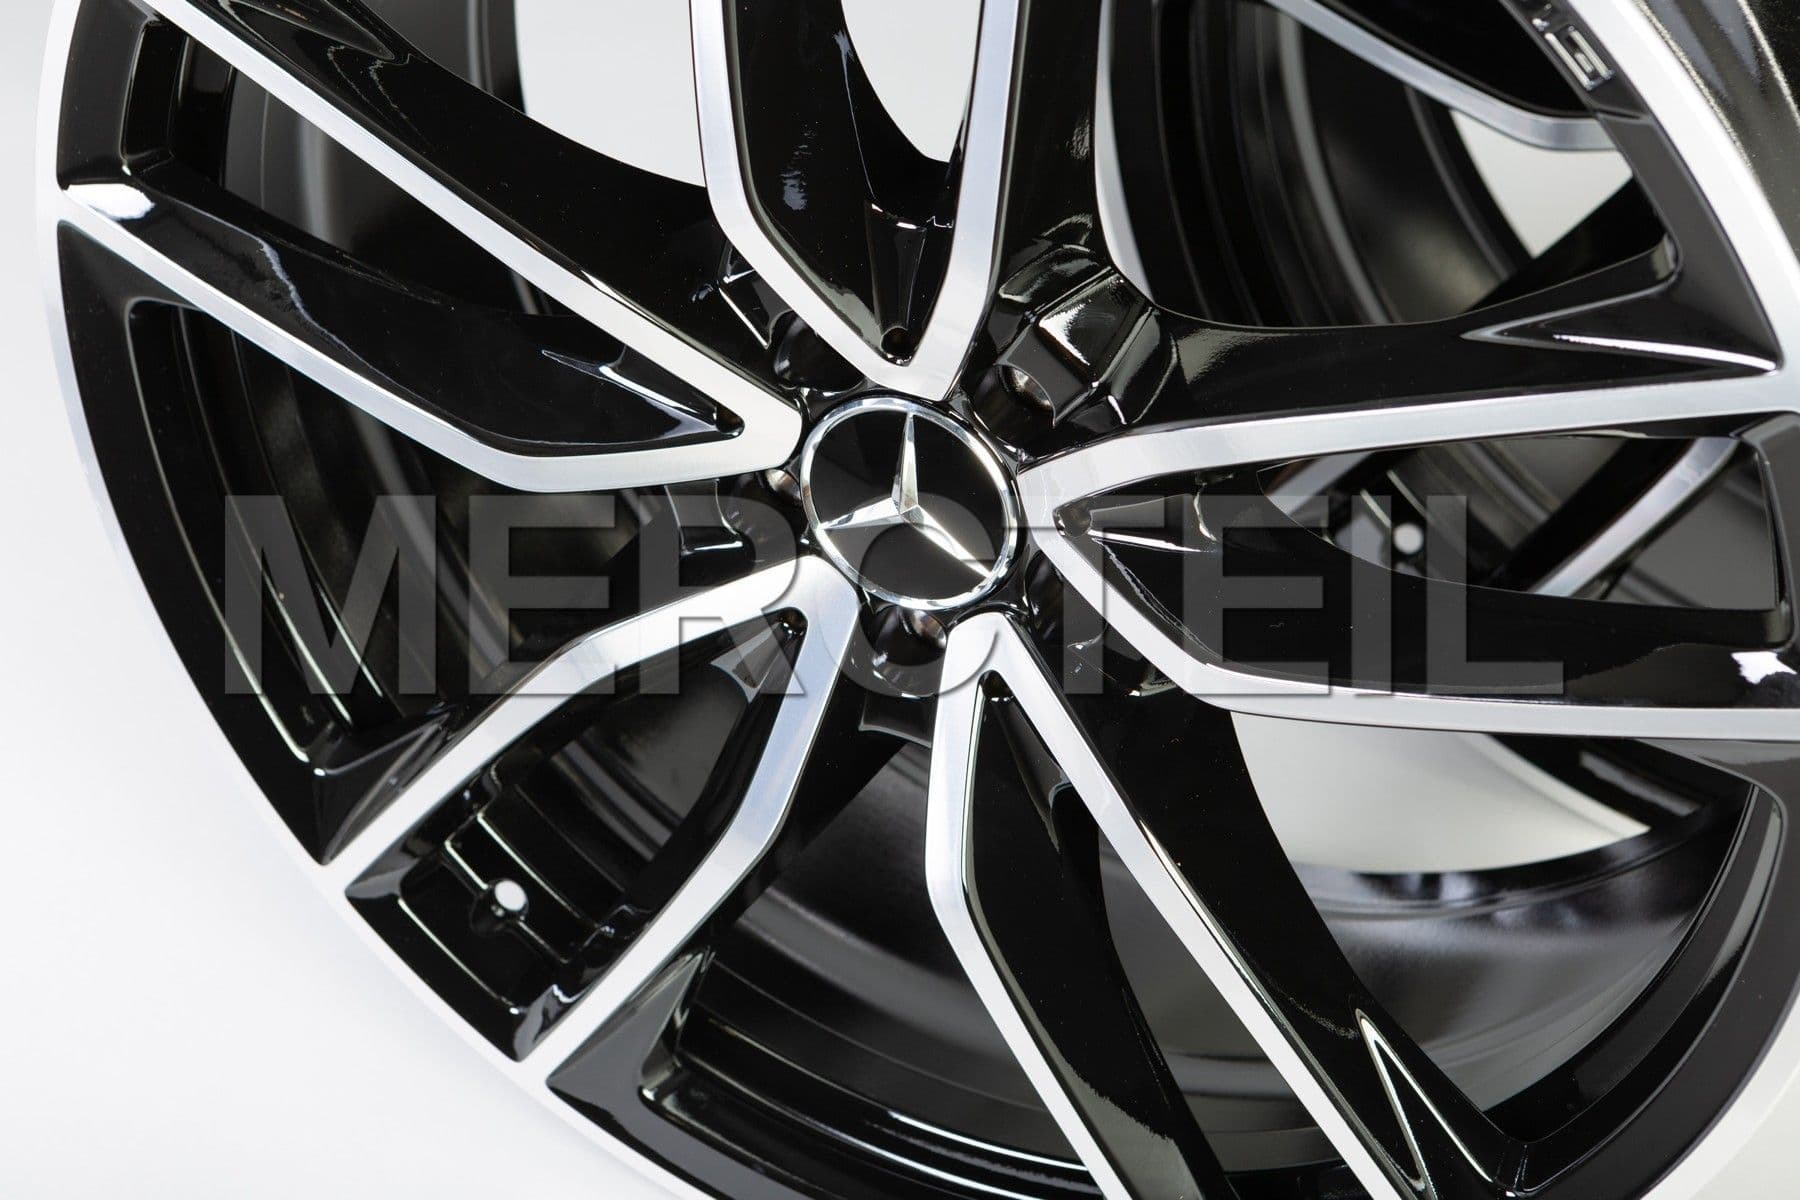 AMG 19 Inch Set of Alloy Wheels for A Class Genuine Mercedes Benz (part number: A17740120007X23)